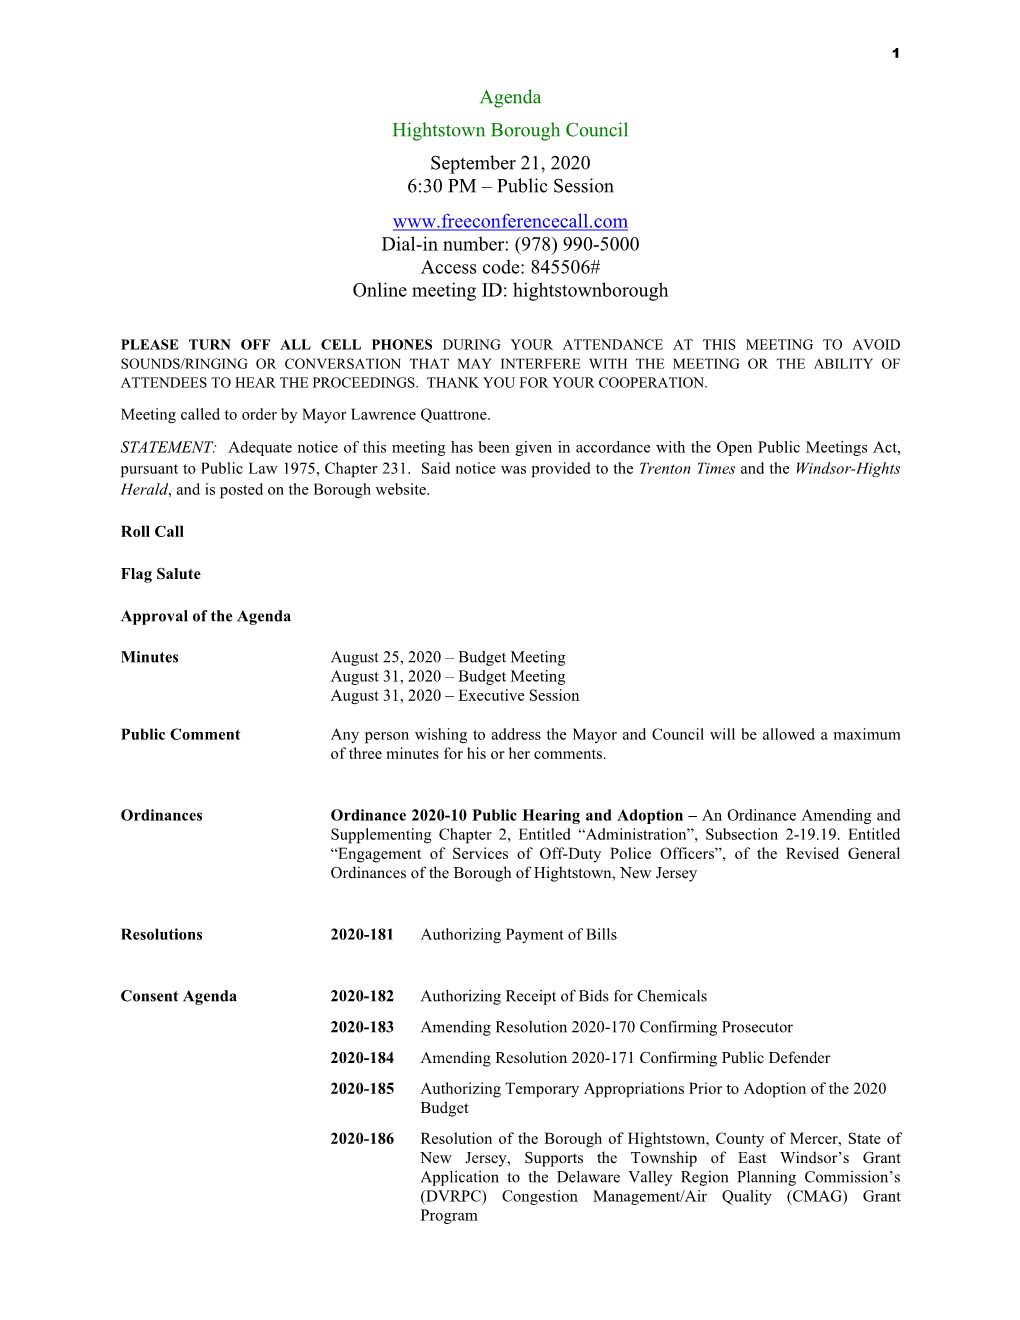 Agenda Hightstown Borough Council September 21, 2020 6:30 PM – Public Session Dial-In Number: (978)